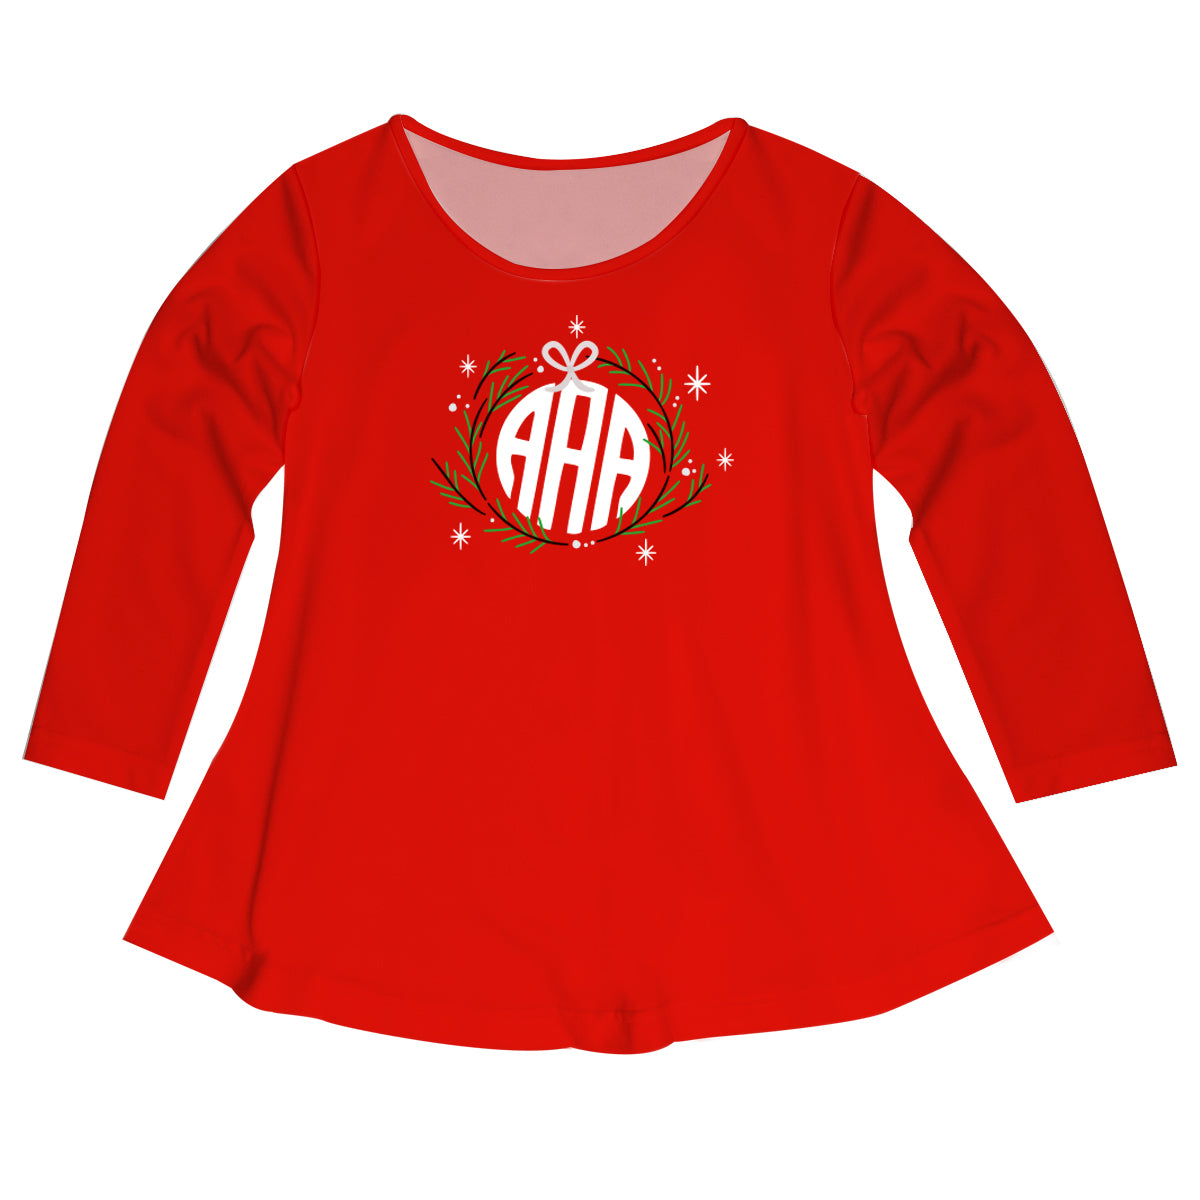 Girls red and white candy canes blouse with monogram - Wimziy&Co.